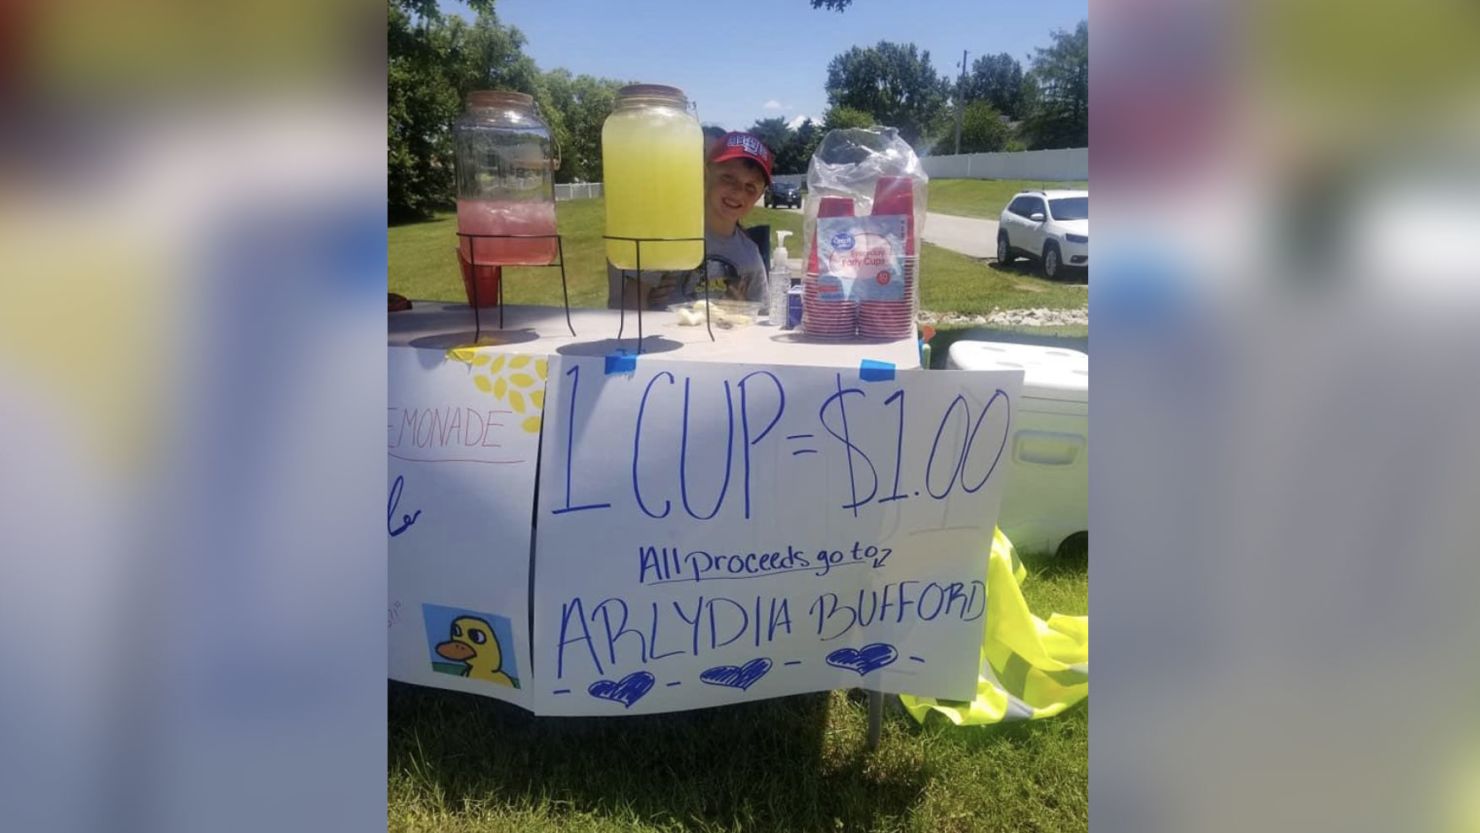 Five-year-old Cooper Wallweber set up his lemonade stand at an elementary school near St. Louis.